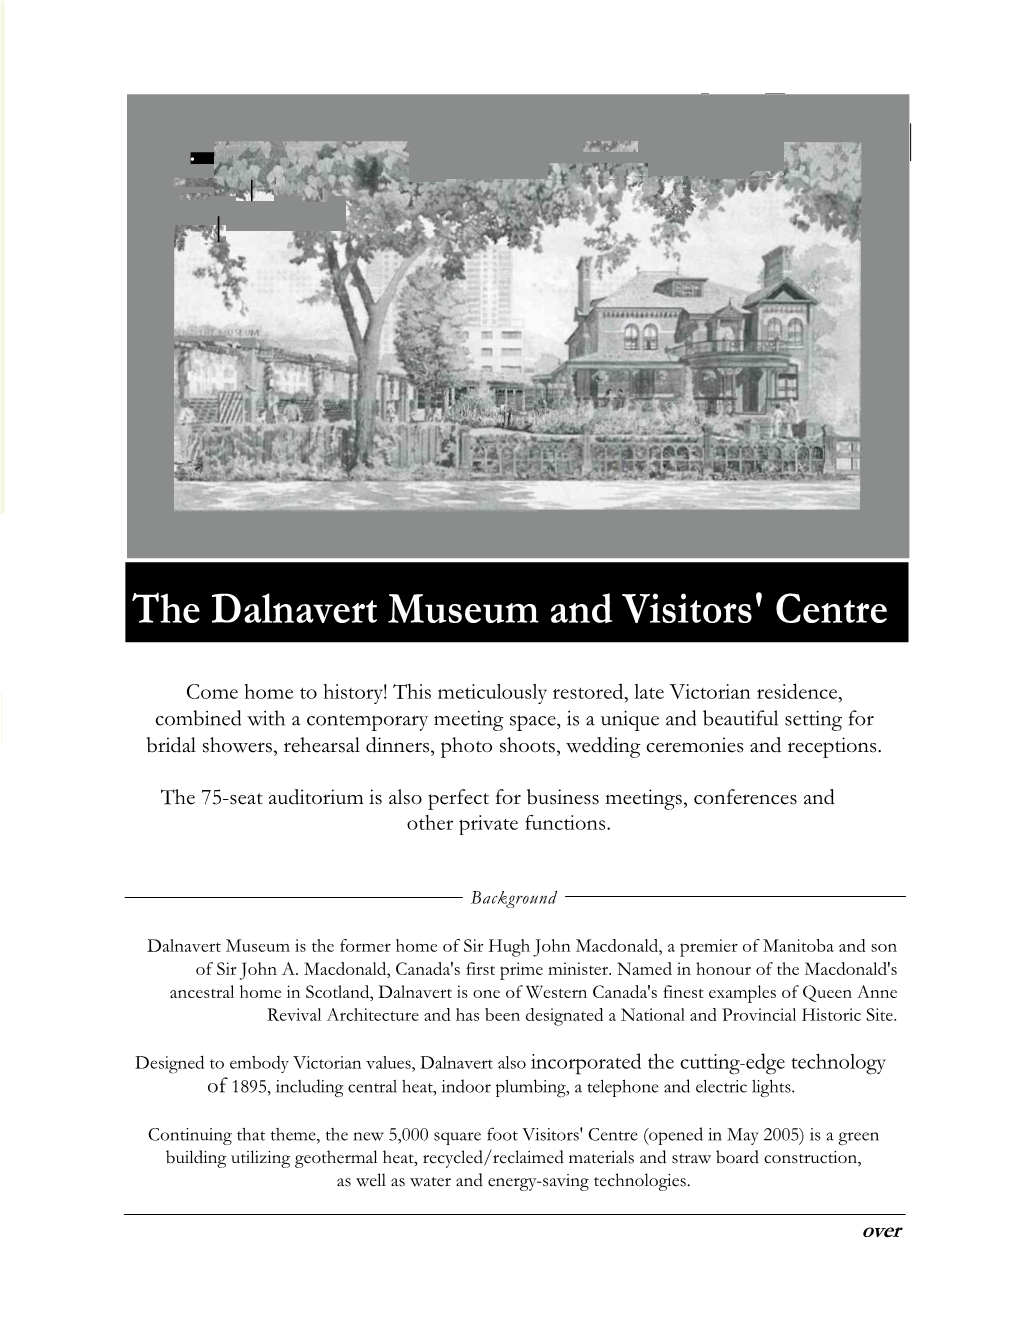 The Dalnavert Museum and Visitors' Centre